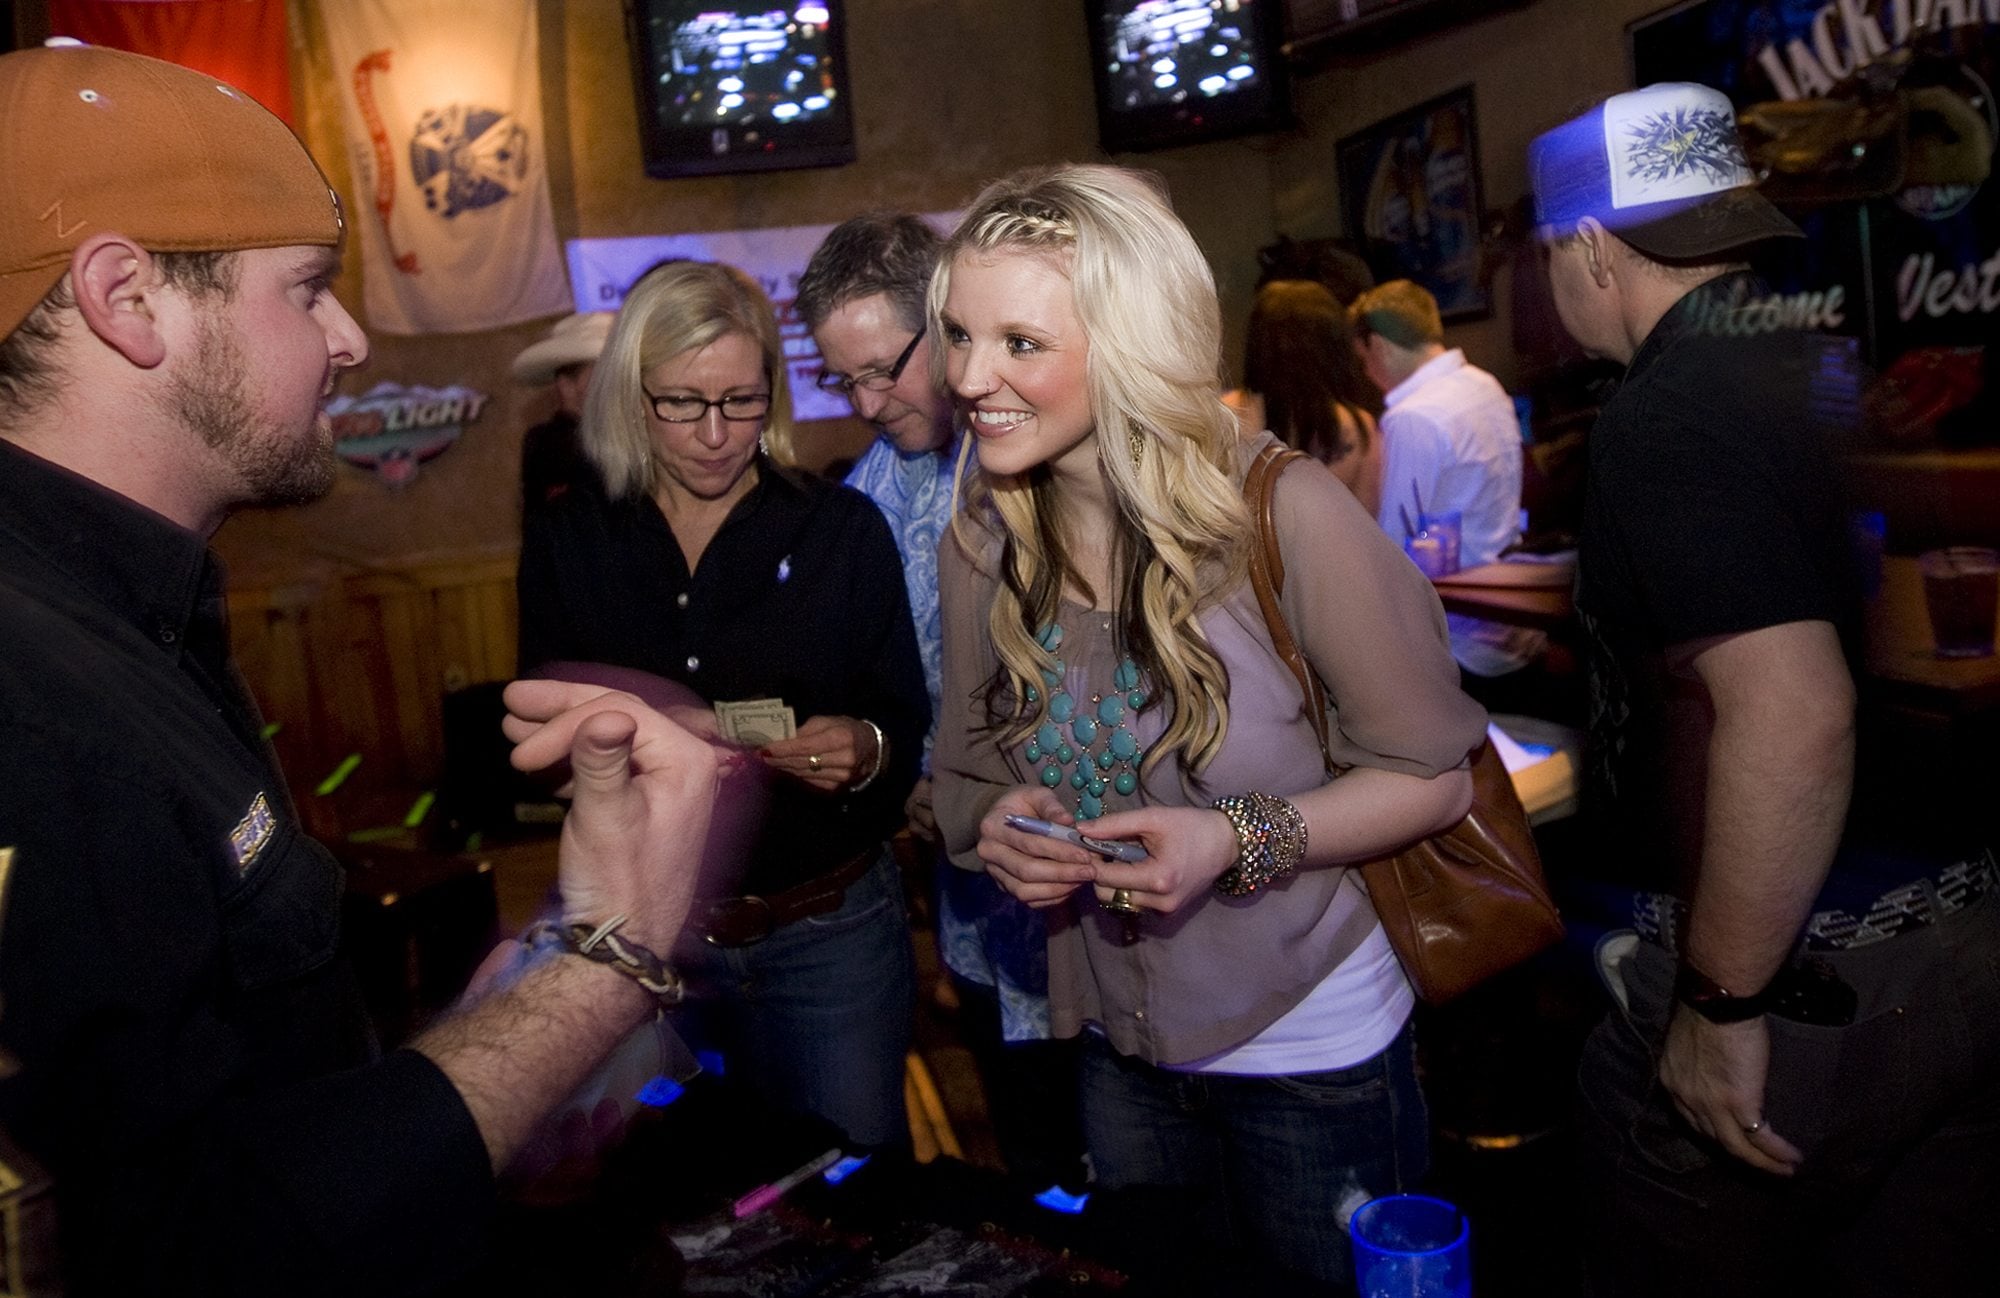 Britnee Kellogg, whose Idol dreams came to an end on Thursday's broadcast, greeted fans and signed autographs Thursday night at Duke's Bar and Grill in Southeast Portland after she performed.